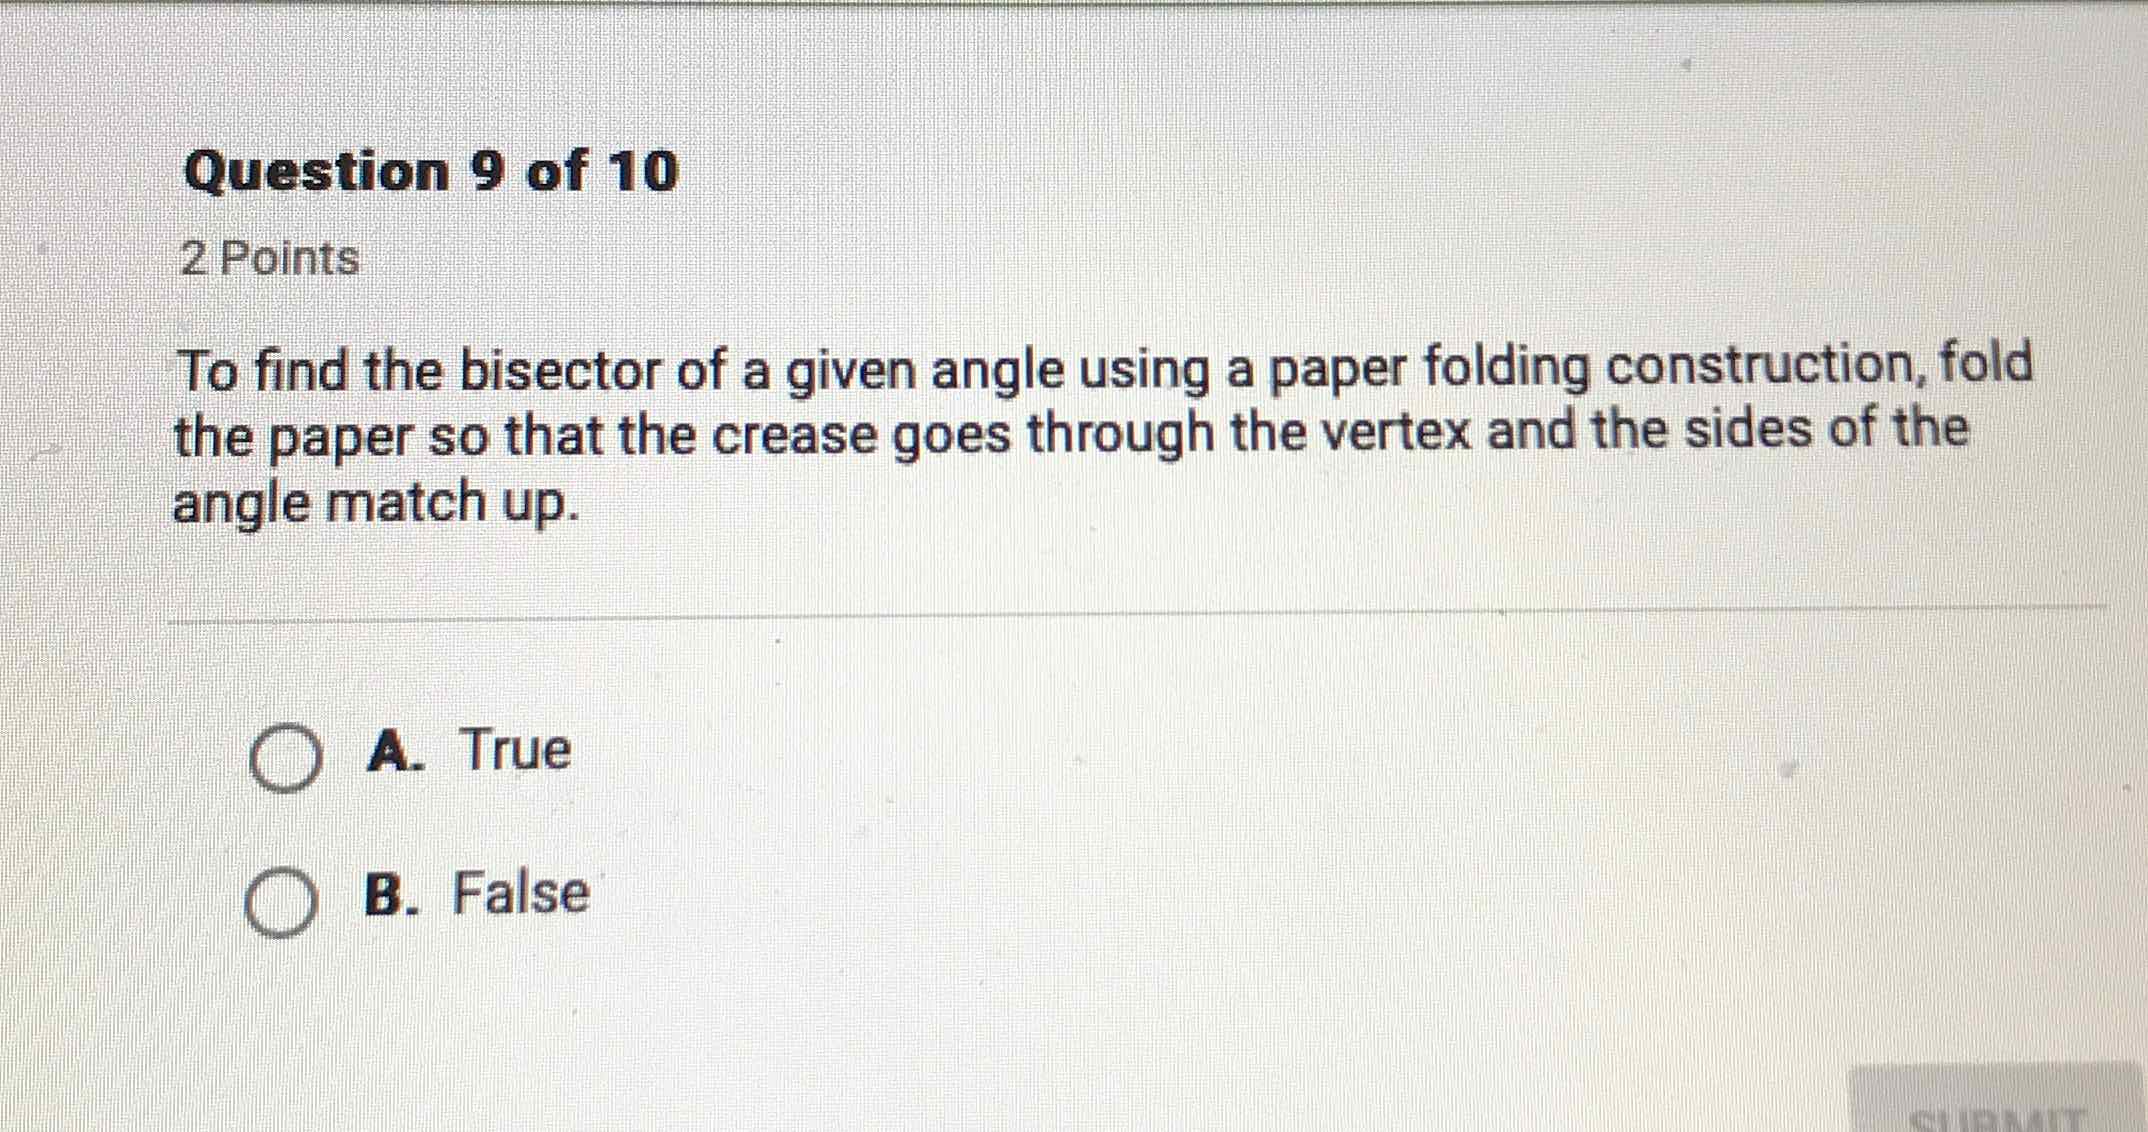 Question 9 of 10
2 Points
To find the bisector of a given angle using a paper folding construction, fold the paper so that the crease goes through the vertex and the sides of the angle match up.
A. True
B. False